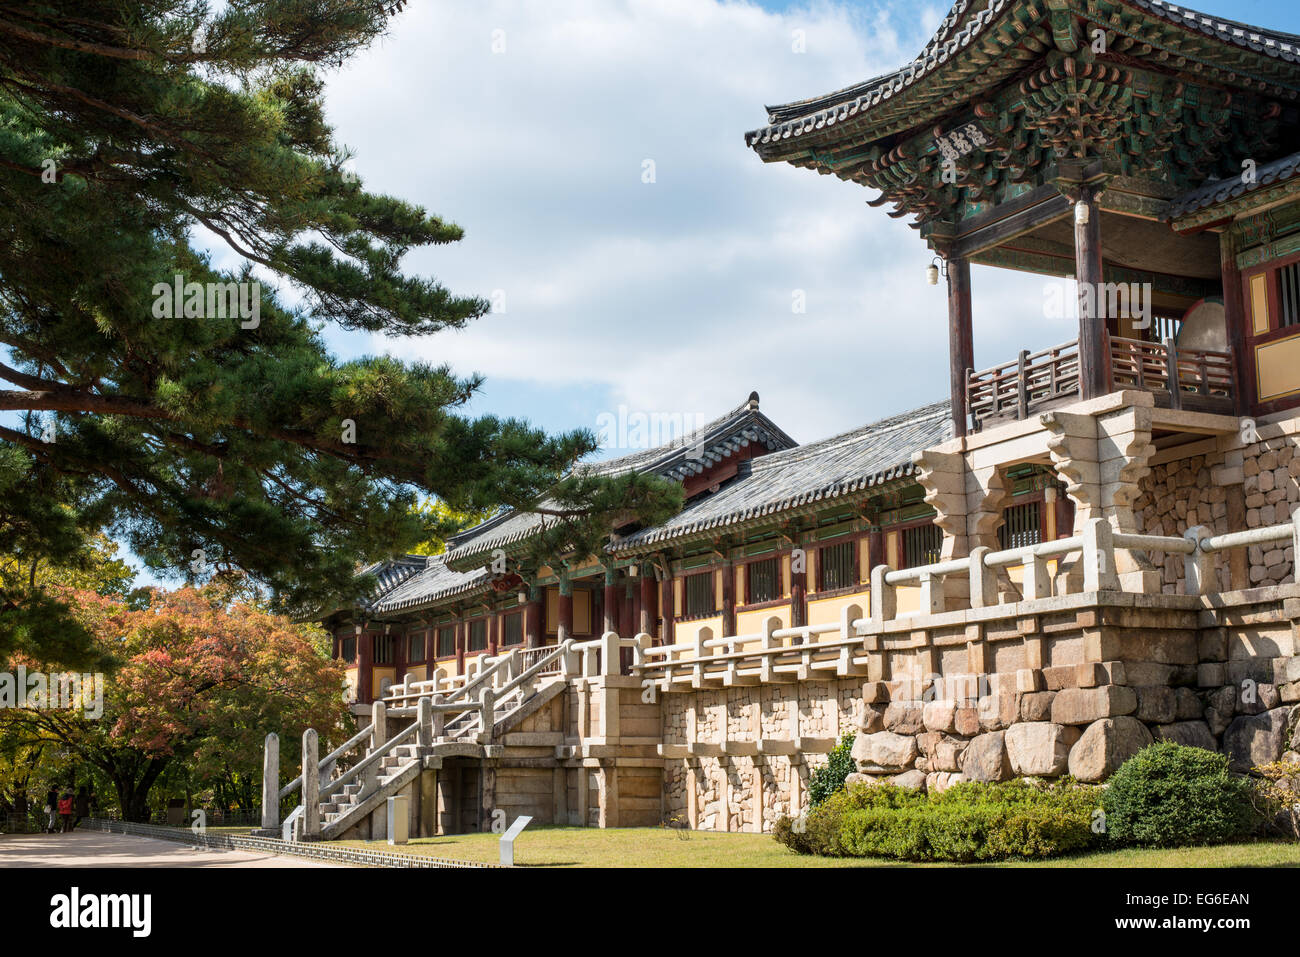 Korean Stone Temple, day with trees in autumn time against bright day Stock Photo